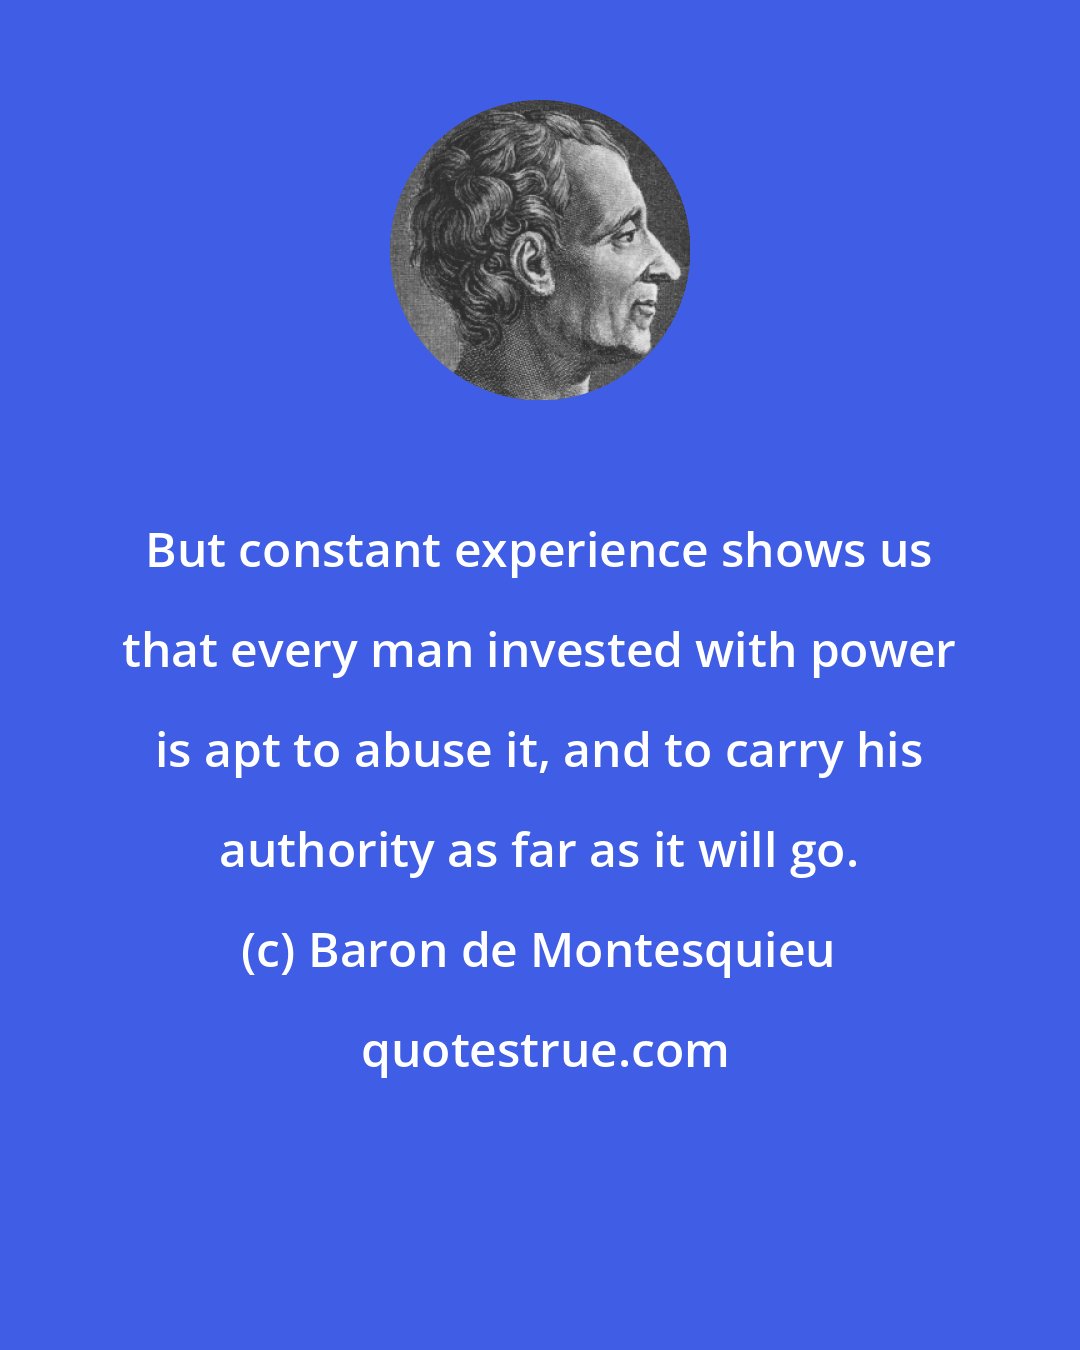 Baron de Montesquieu: But constant experience shows us that every man invested with power is apt to abuse it, and to carry his authority as far as it will go.